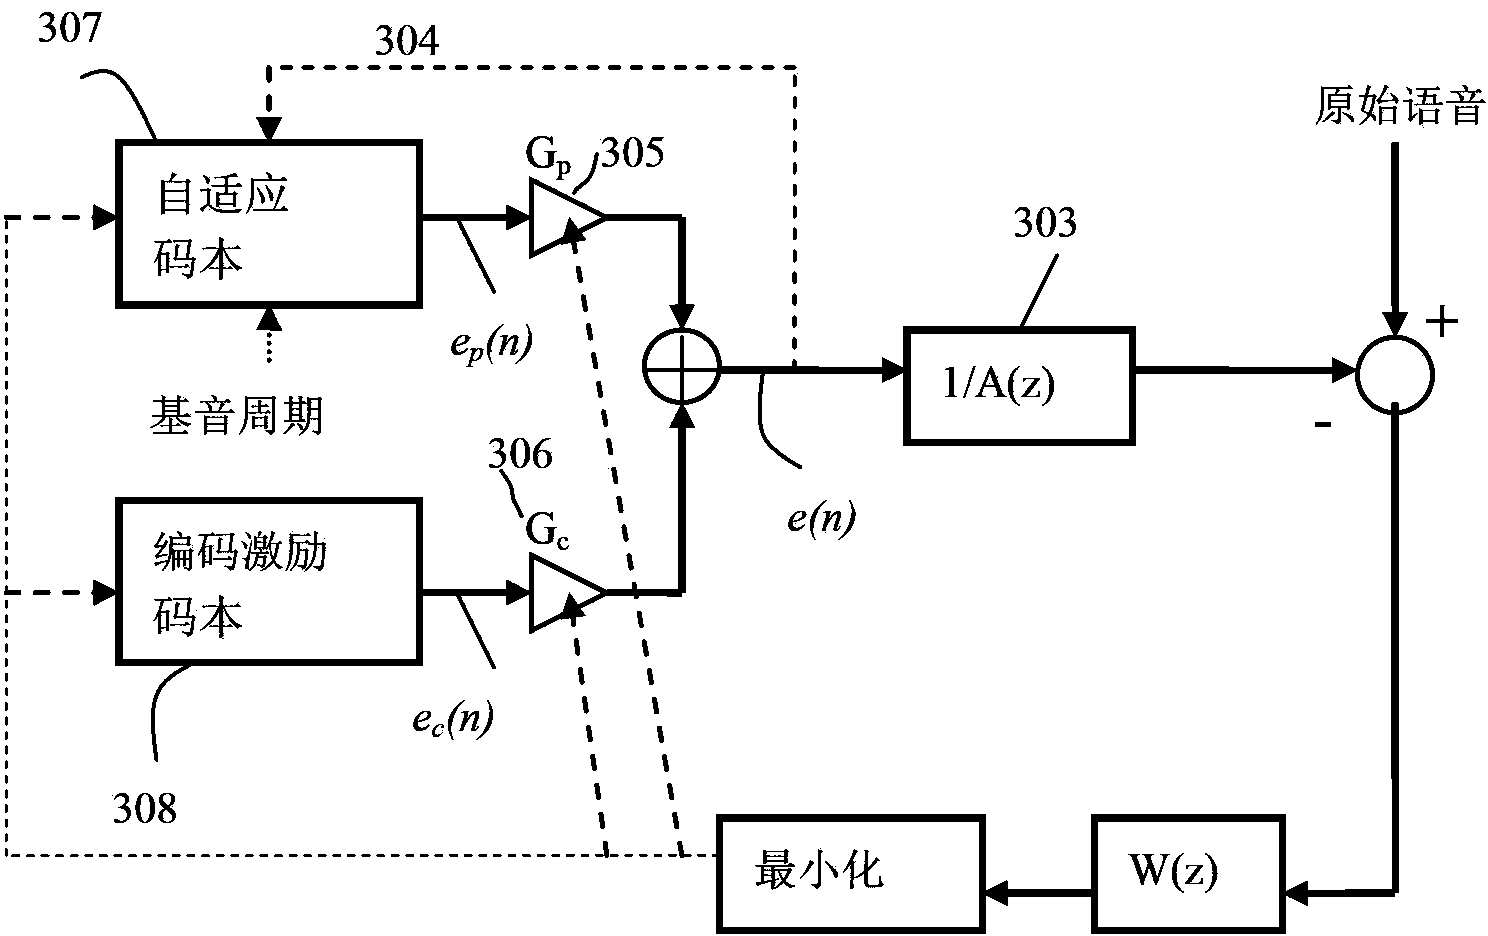 Speech coding system to improve packet loss repairing quality